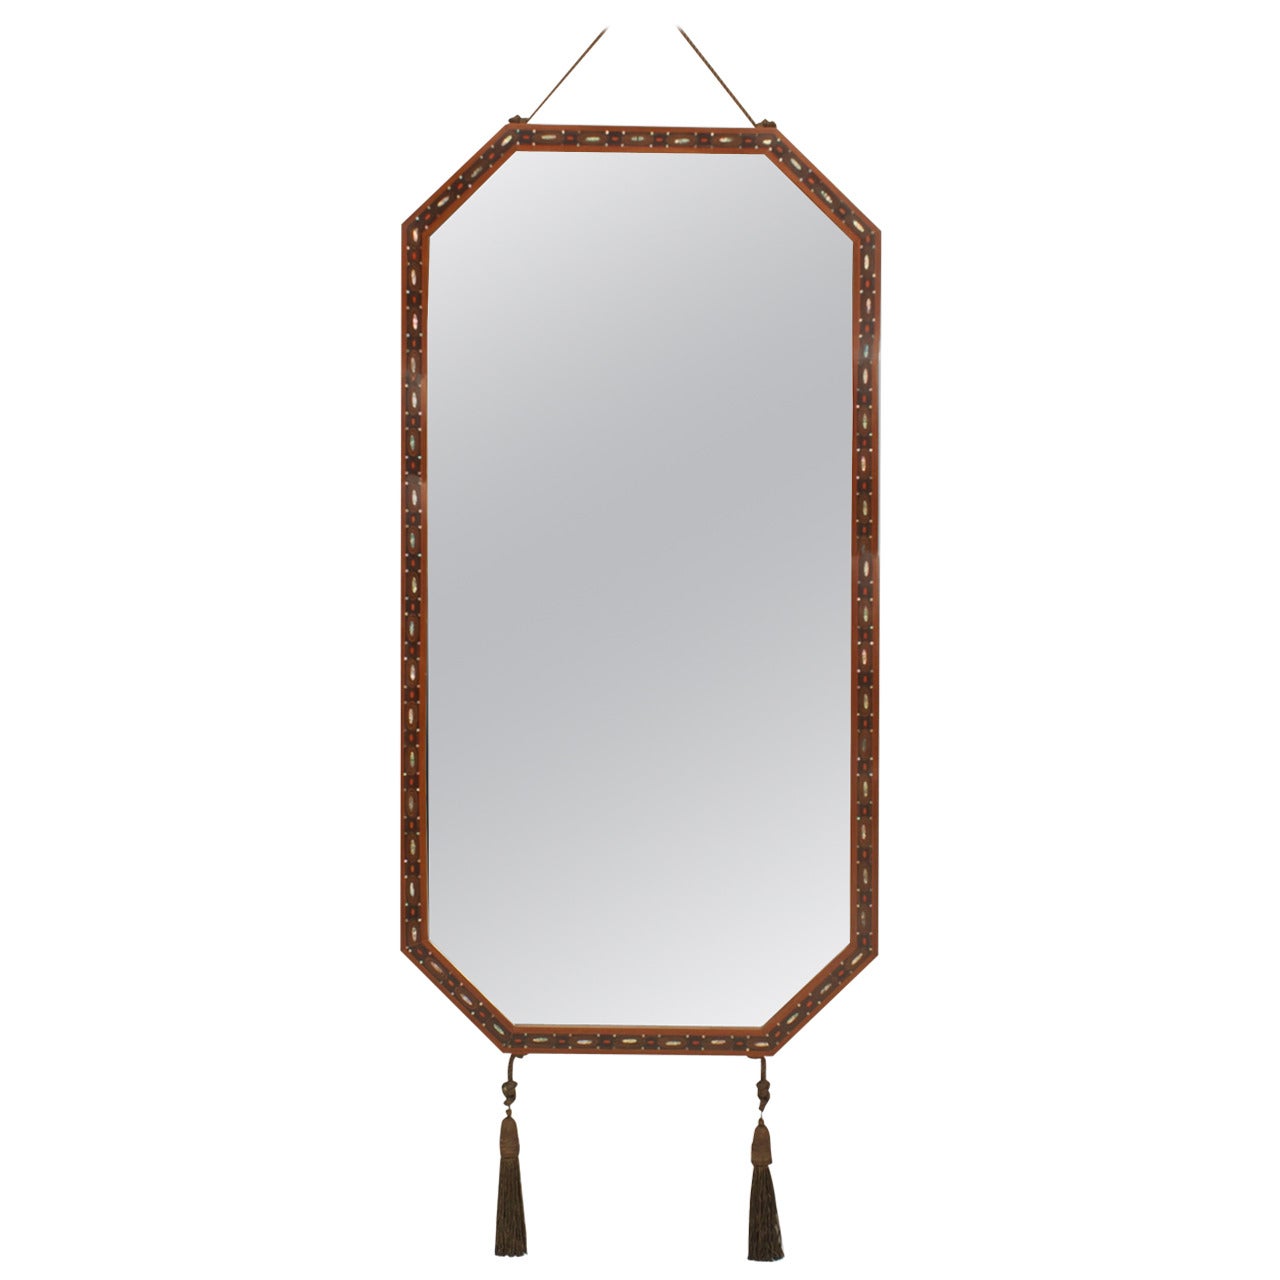 French Art Deco Inlaid Mahogany Mirror by Maurice Dufrene For Sale